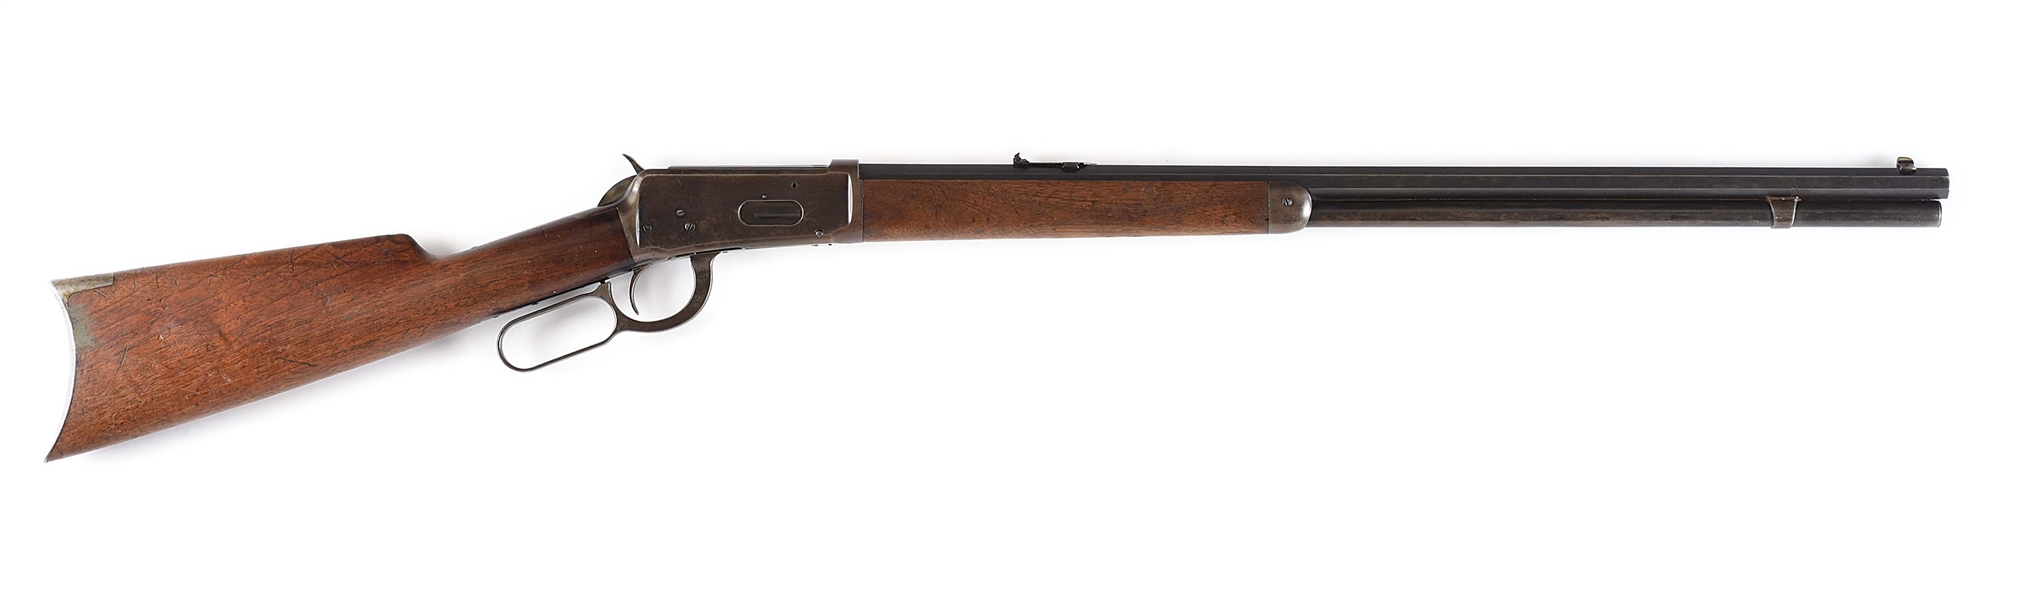 (A) ANTIQUE WINCHESTER MODEL 1894 LEVER ACTION RIFLE (1896).